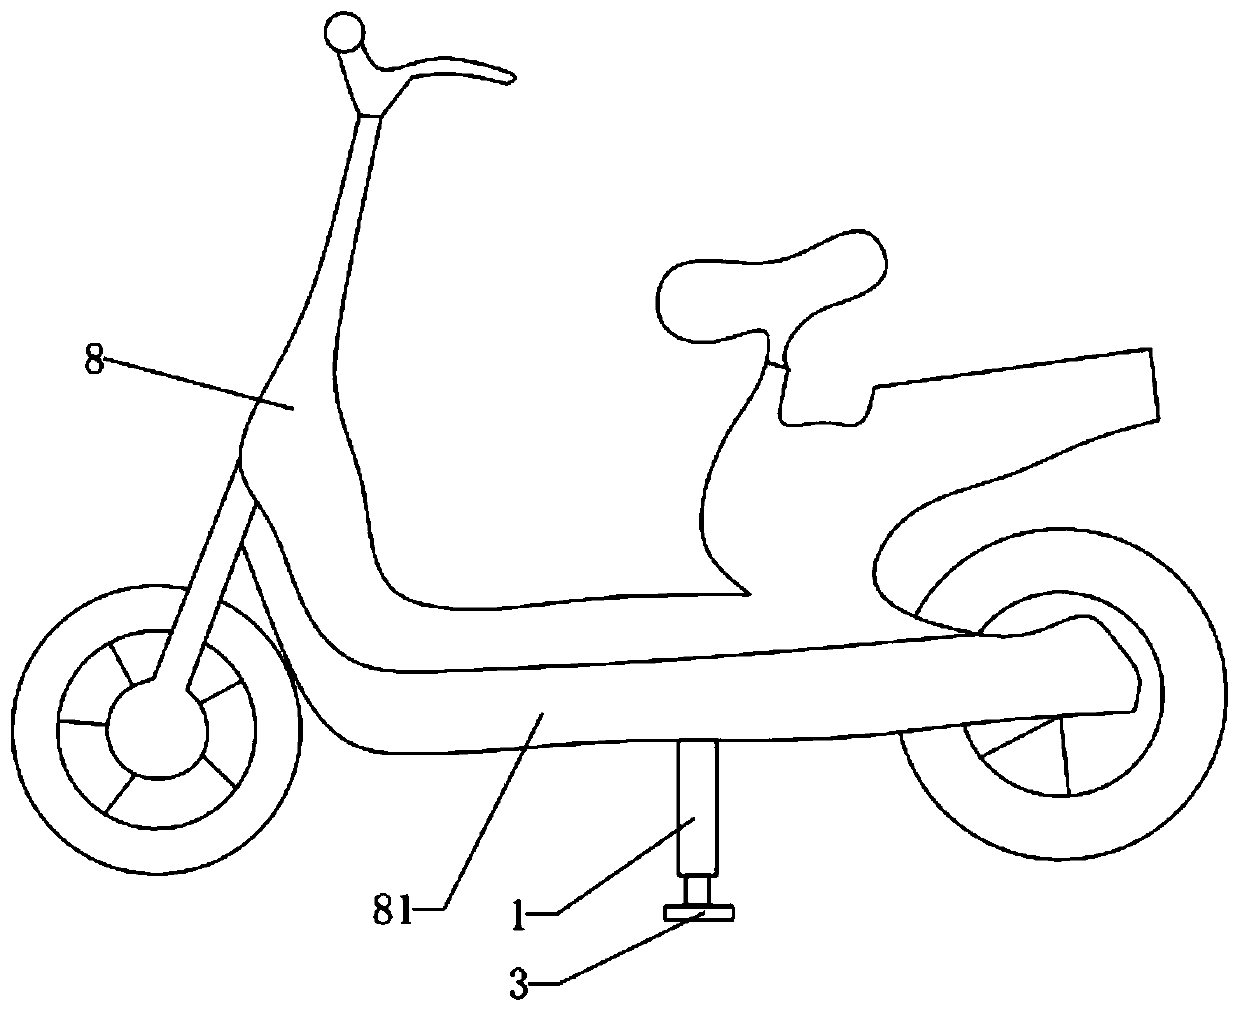 Electric vehicle with electric supporting frame